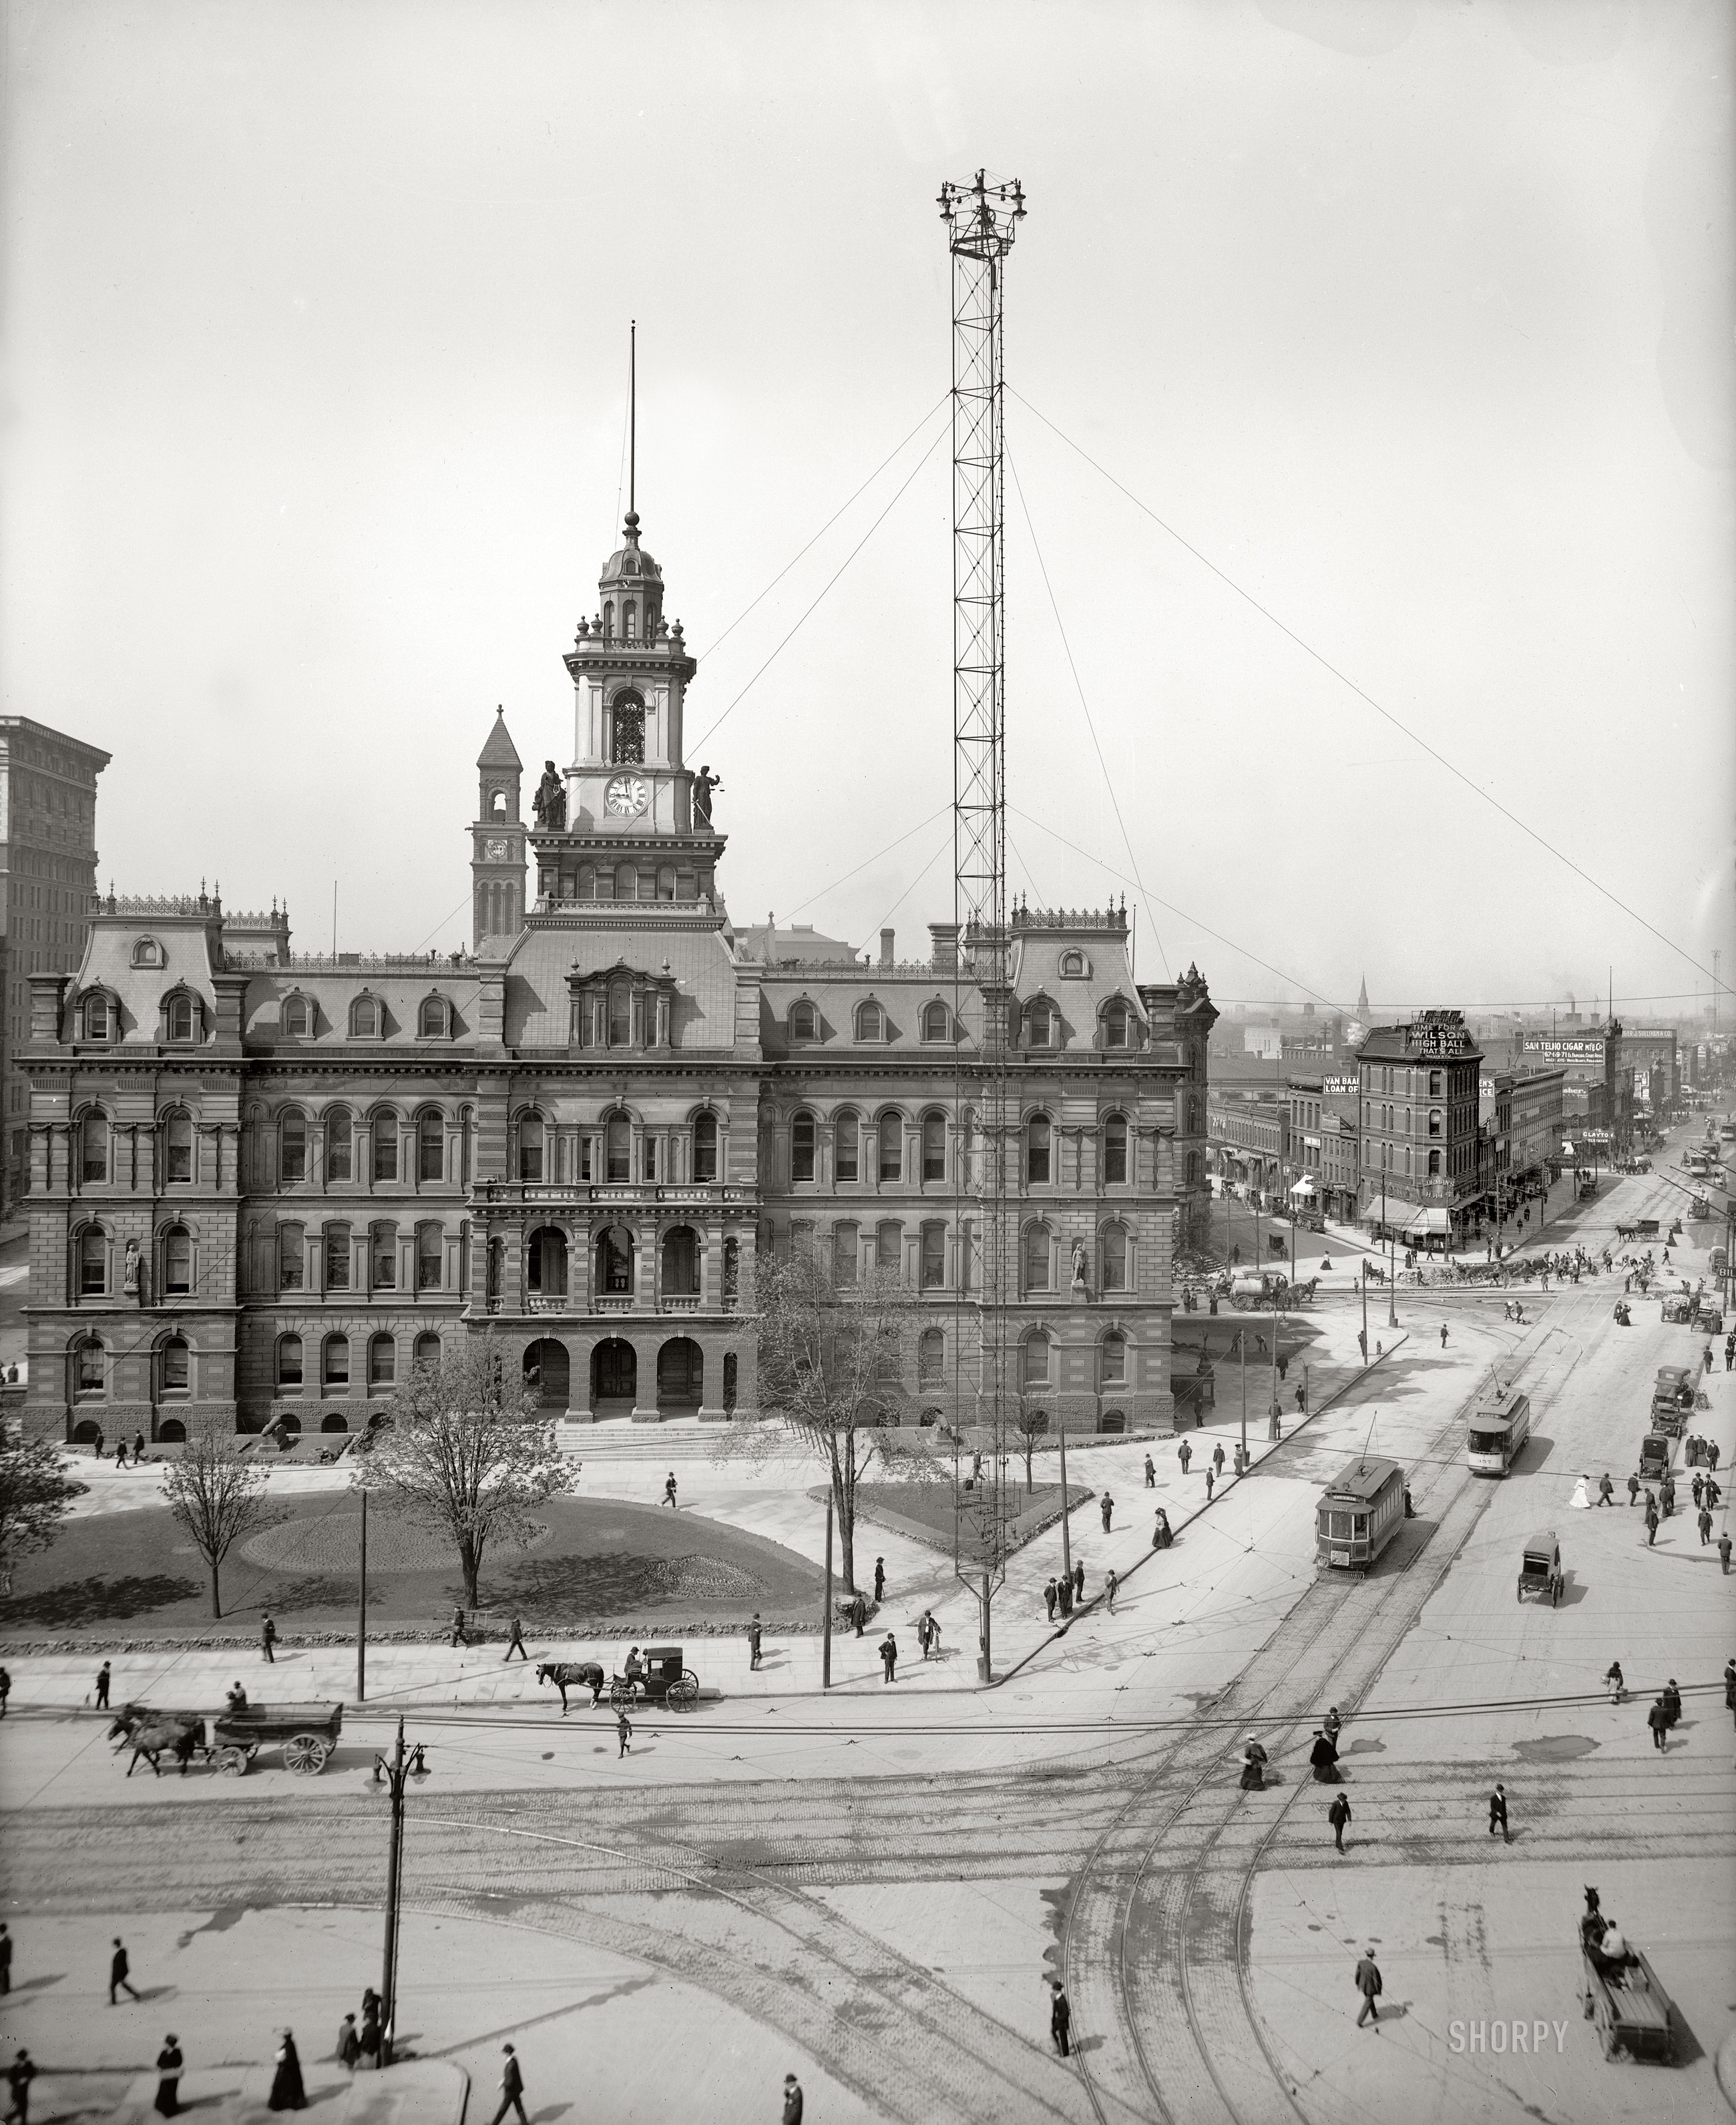 Detroit circa 1905. "The Campus Martius." This middle section of a three-part panorama features City Hall and one of Detroit's celebrated arc-lamp standards, or "moonlight towers" -- appropriately reminiscent of Wells and Verne in a plaza named after Mars. Detroit Publishing Company glass negative. View full size.